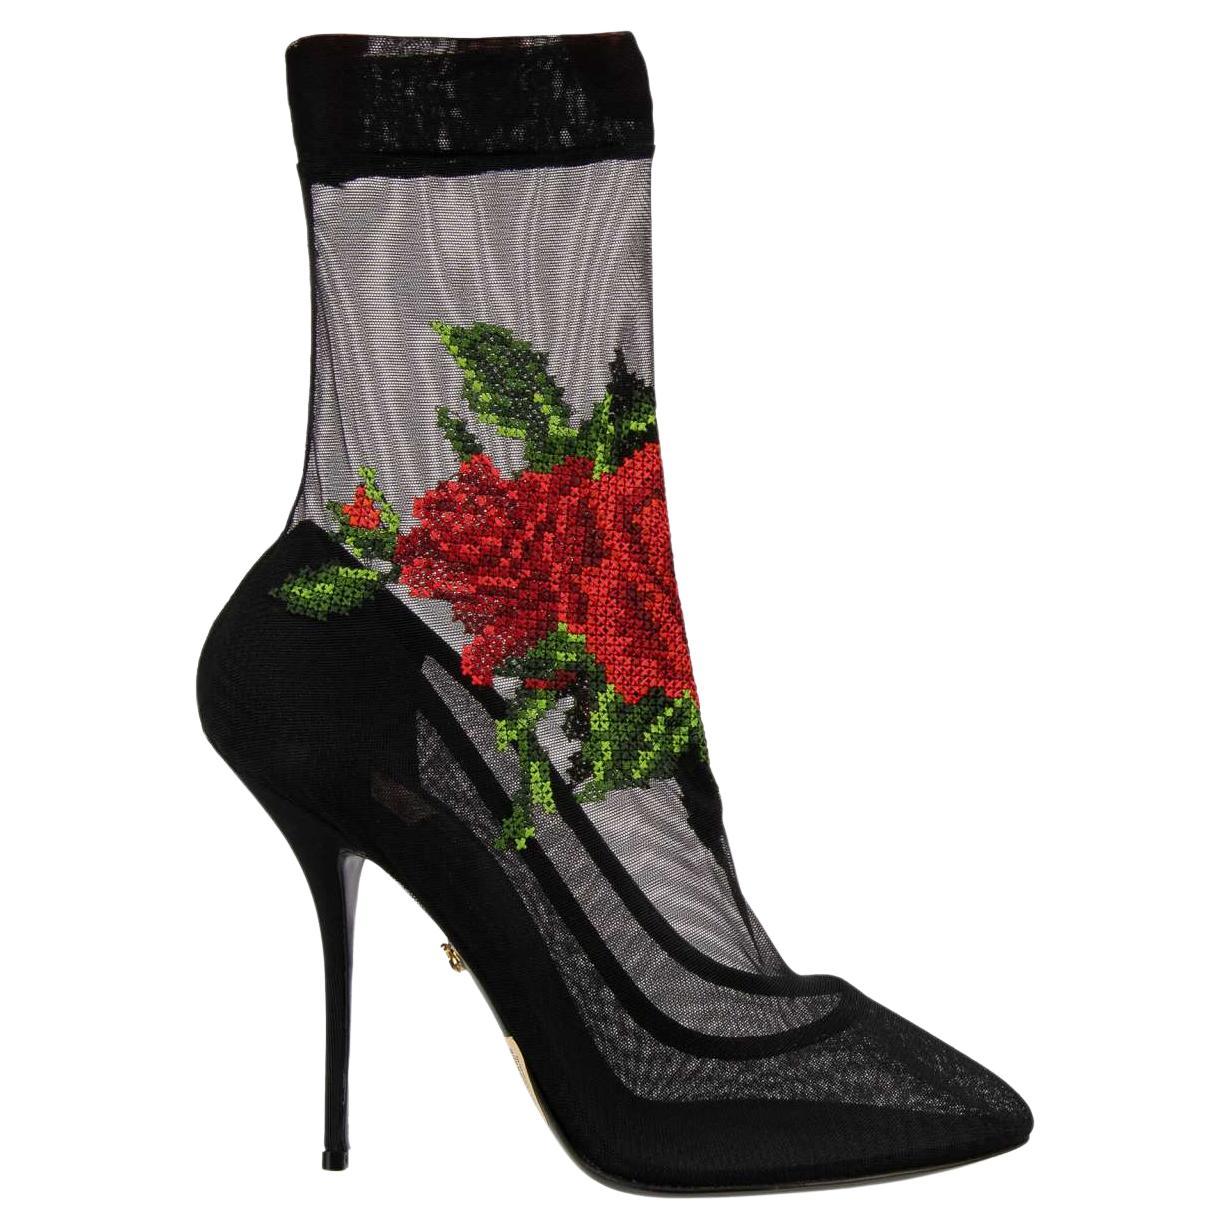 Dolce & Gabbana - Rose Embroidery Tulle Pumps COCO Black 40 10 For Sale